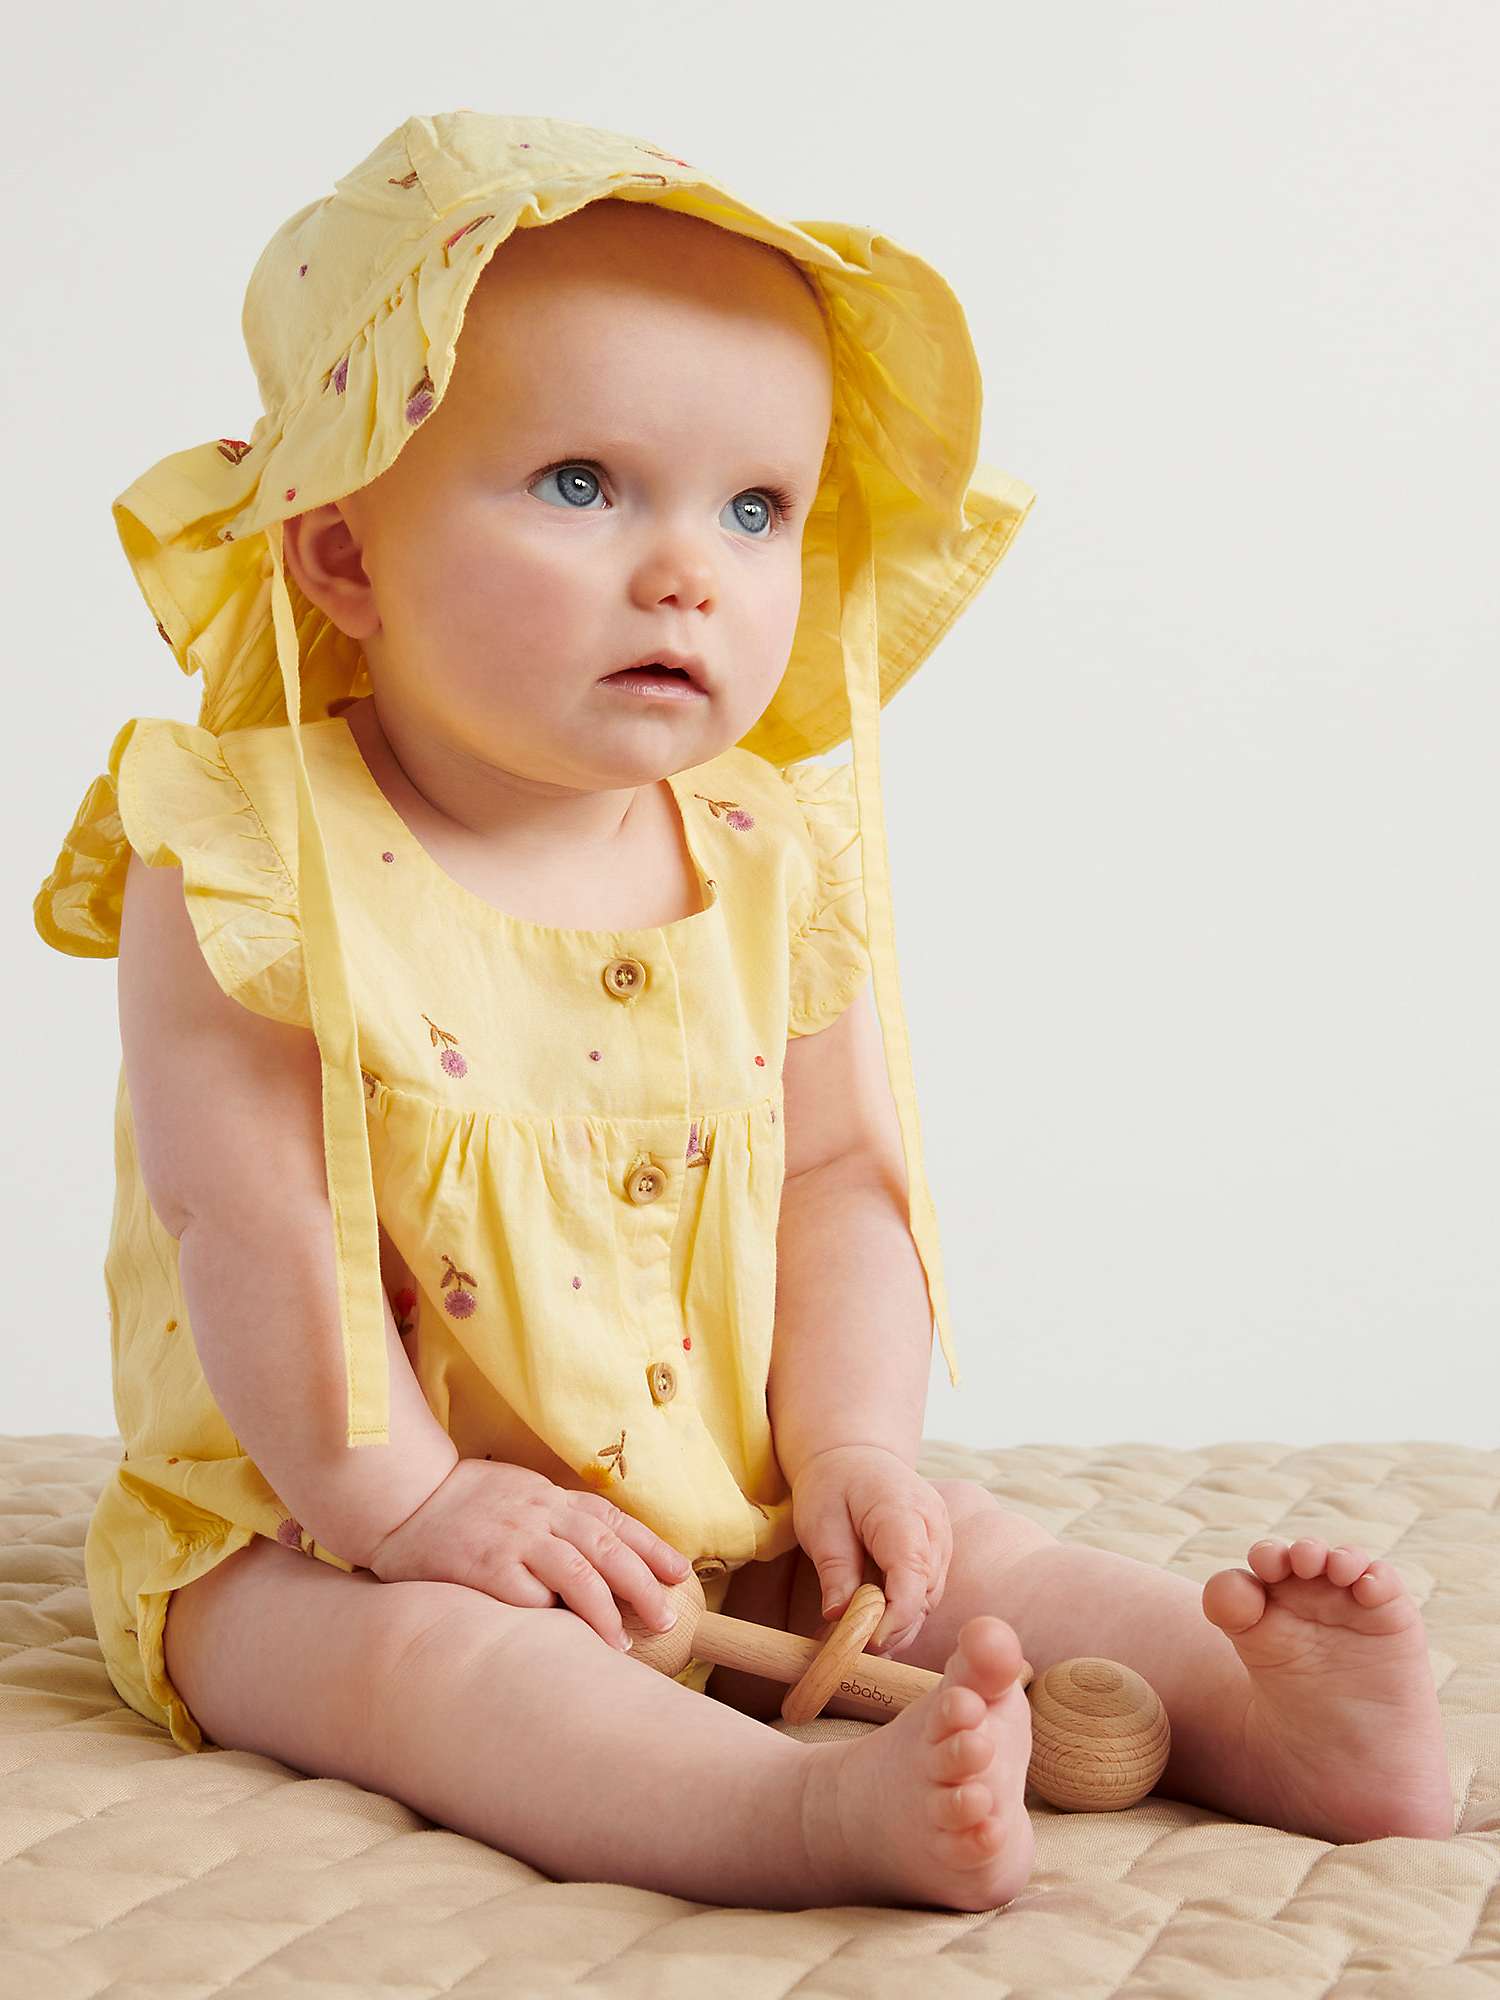 Buy Purebaby Baby Organic Cotton Embroided Floral Bodysuit, Tufted Floral Online at johnlewis.com